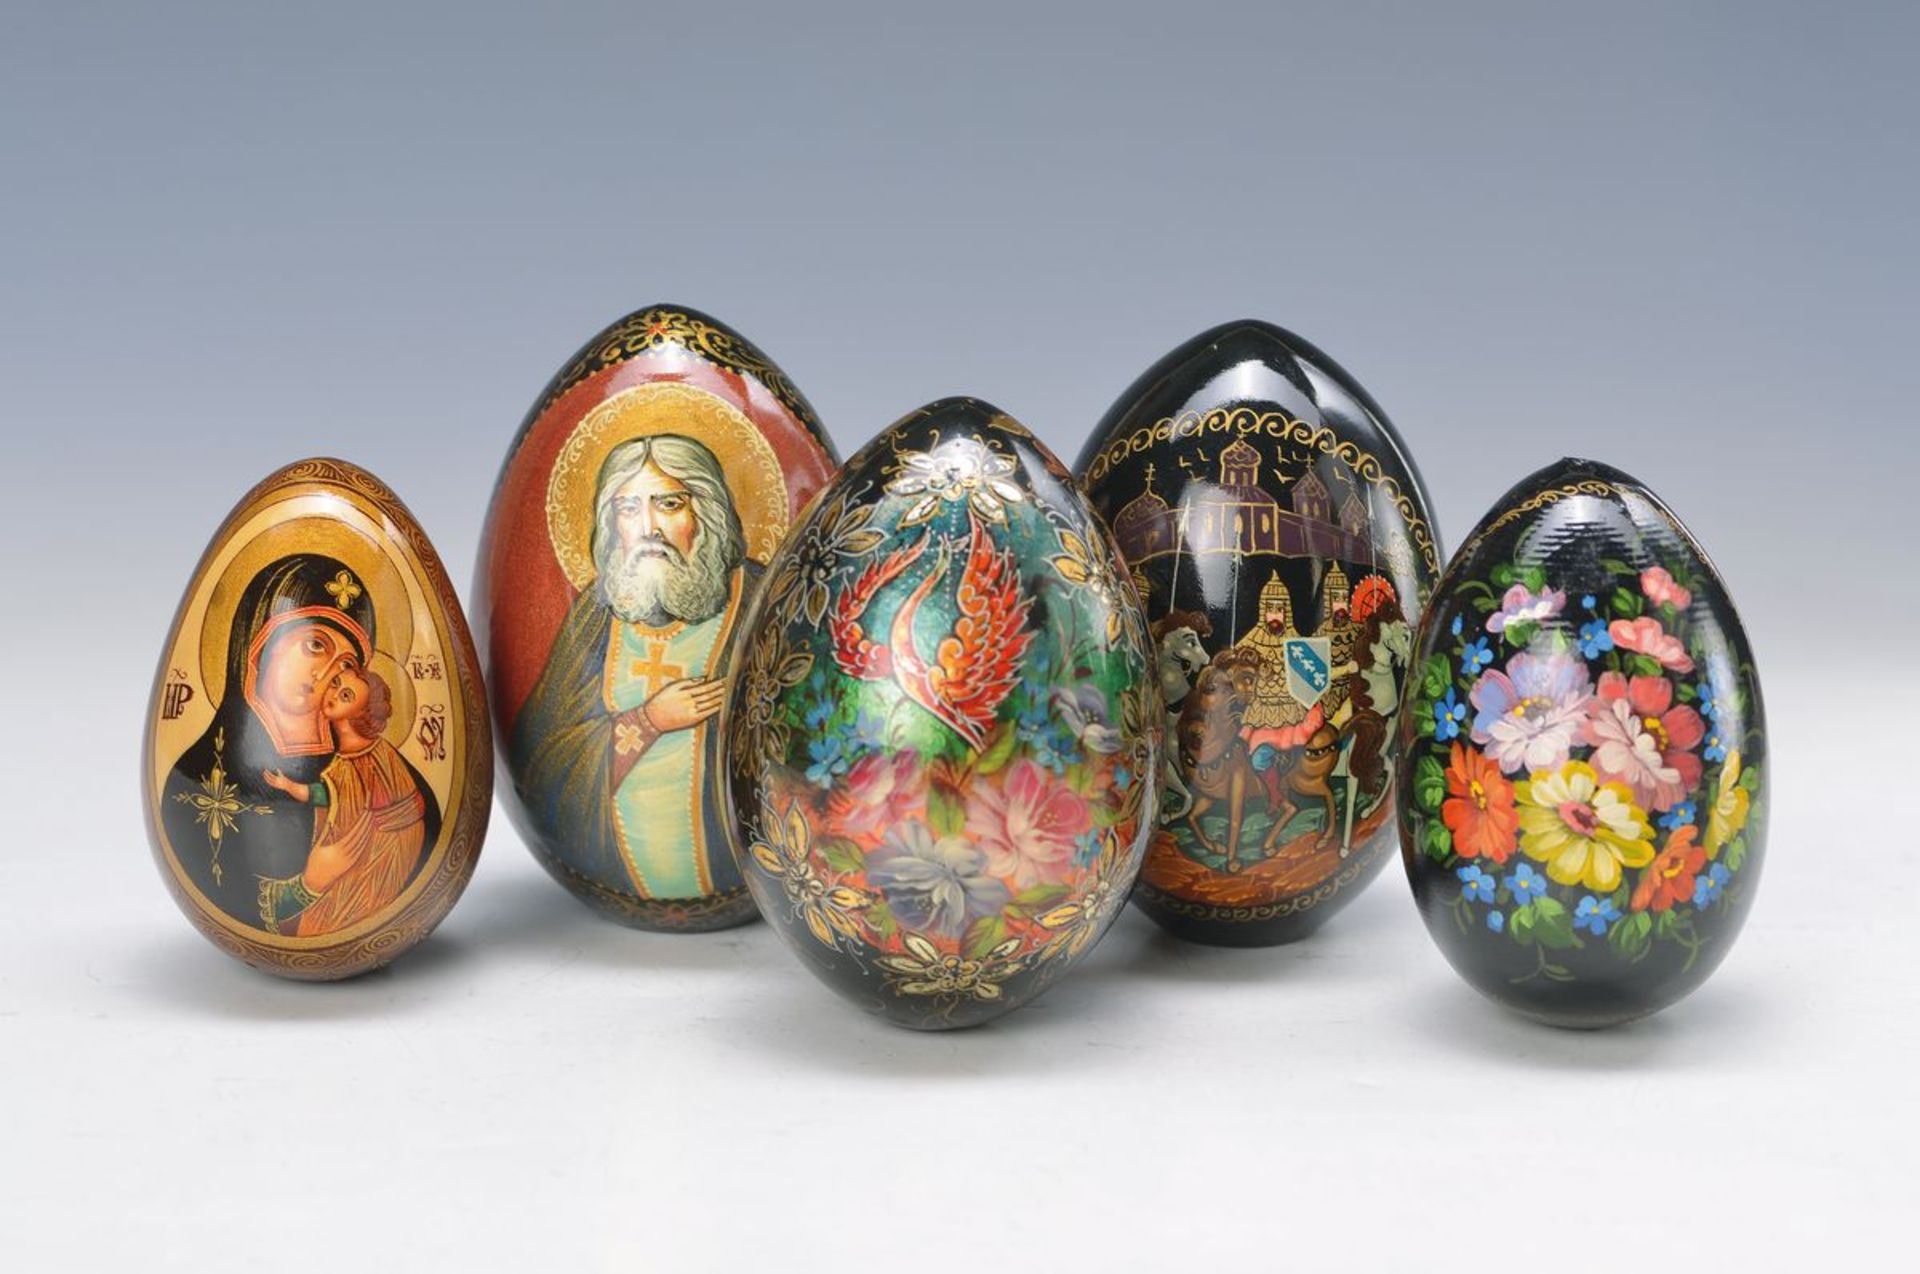 5 easter eggs, Russia, 1970-1990s, varnish, finely painted in bright colors with Christianmotifs and